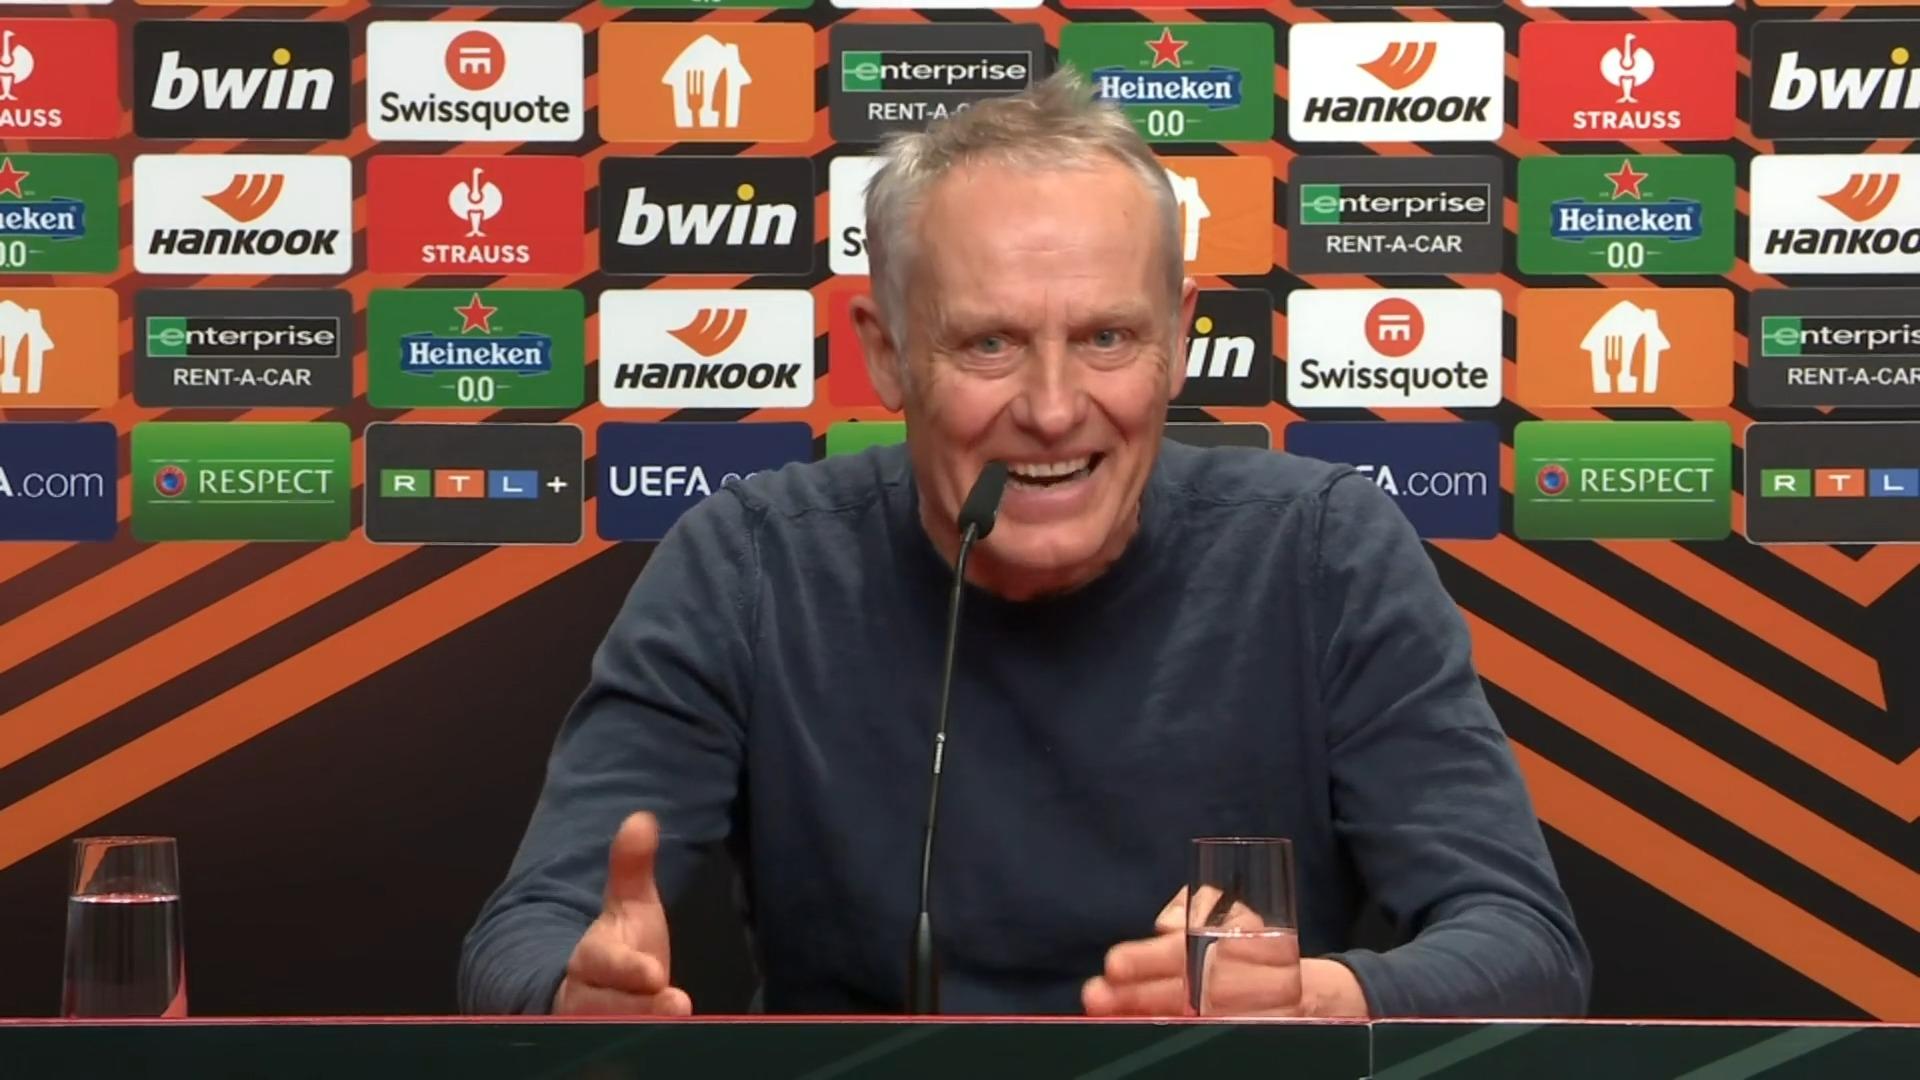 Streich gets angry at the press conference about the time game